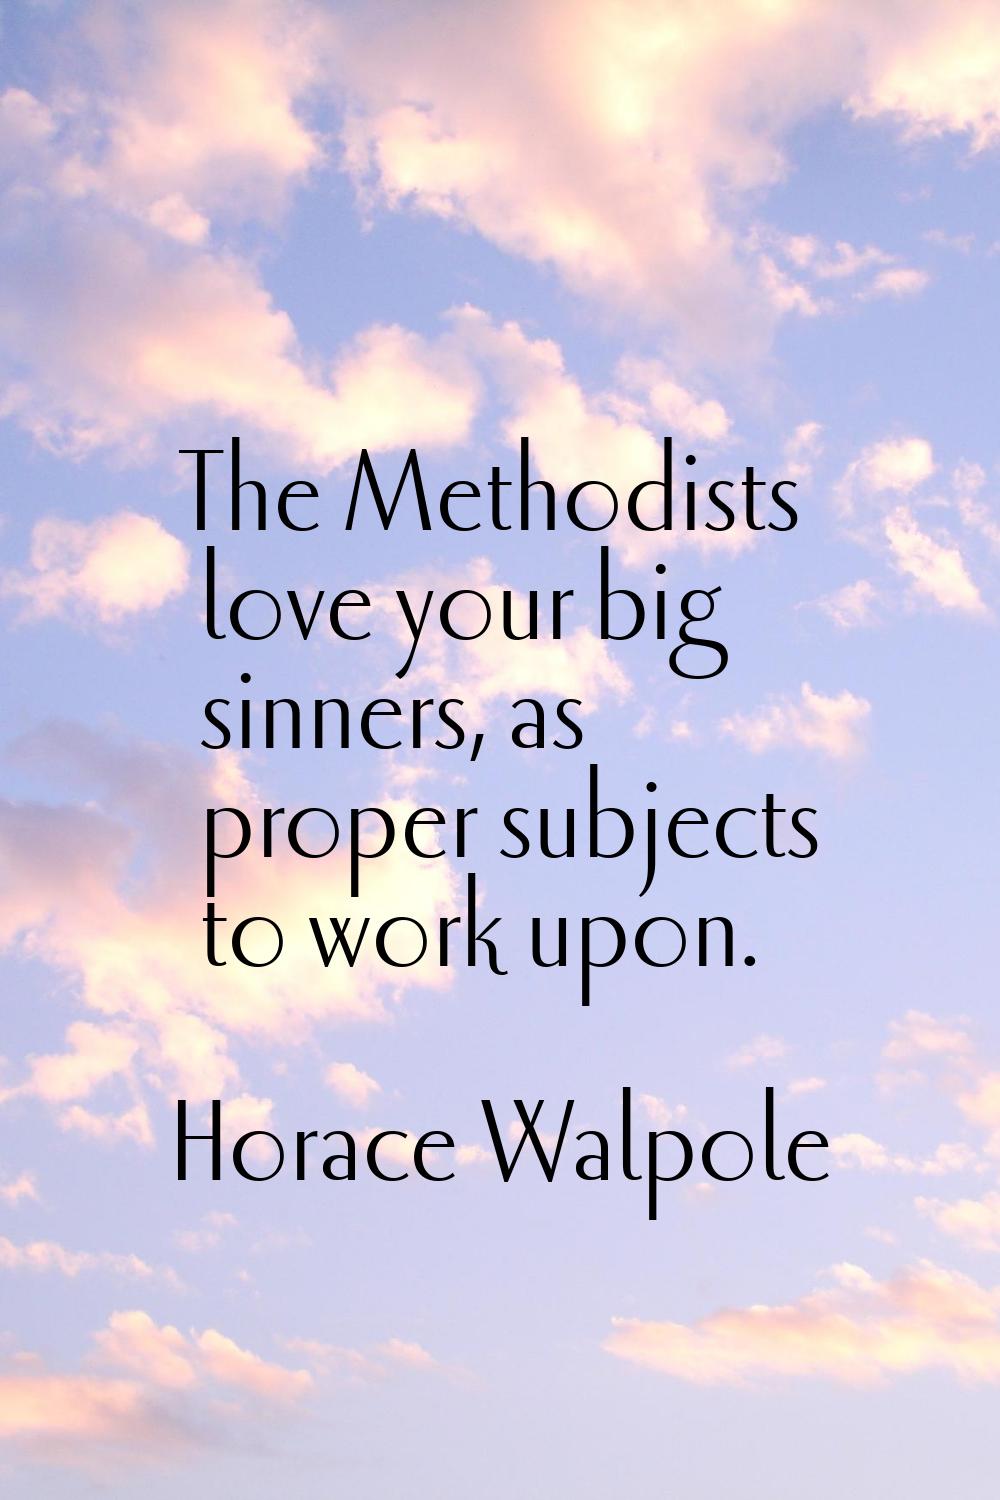 The Methodists love your big sinners, as proper subjects to work upon.